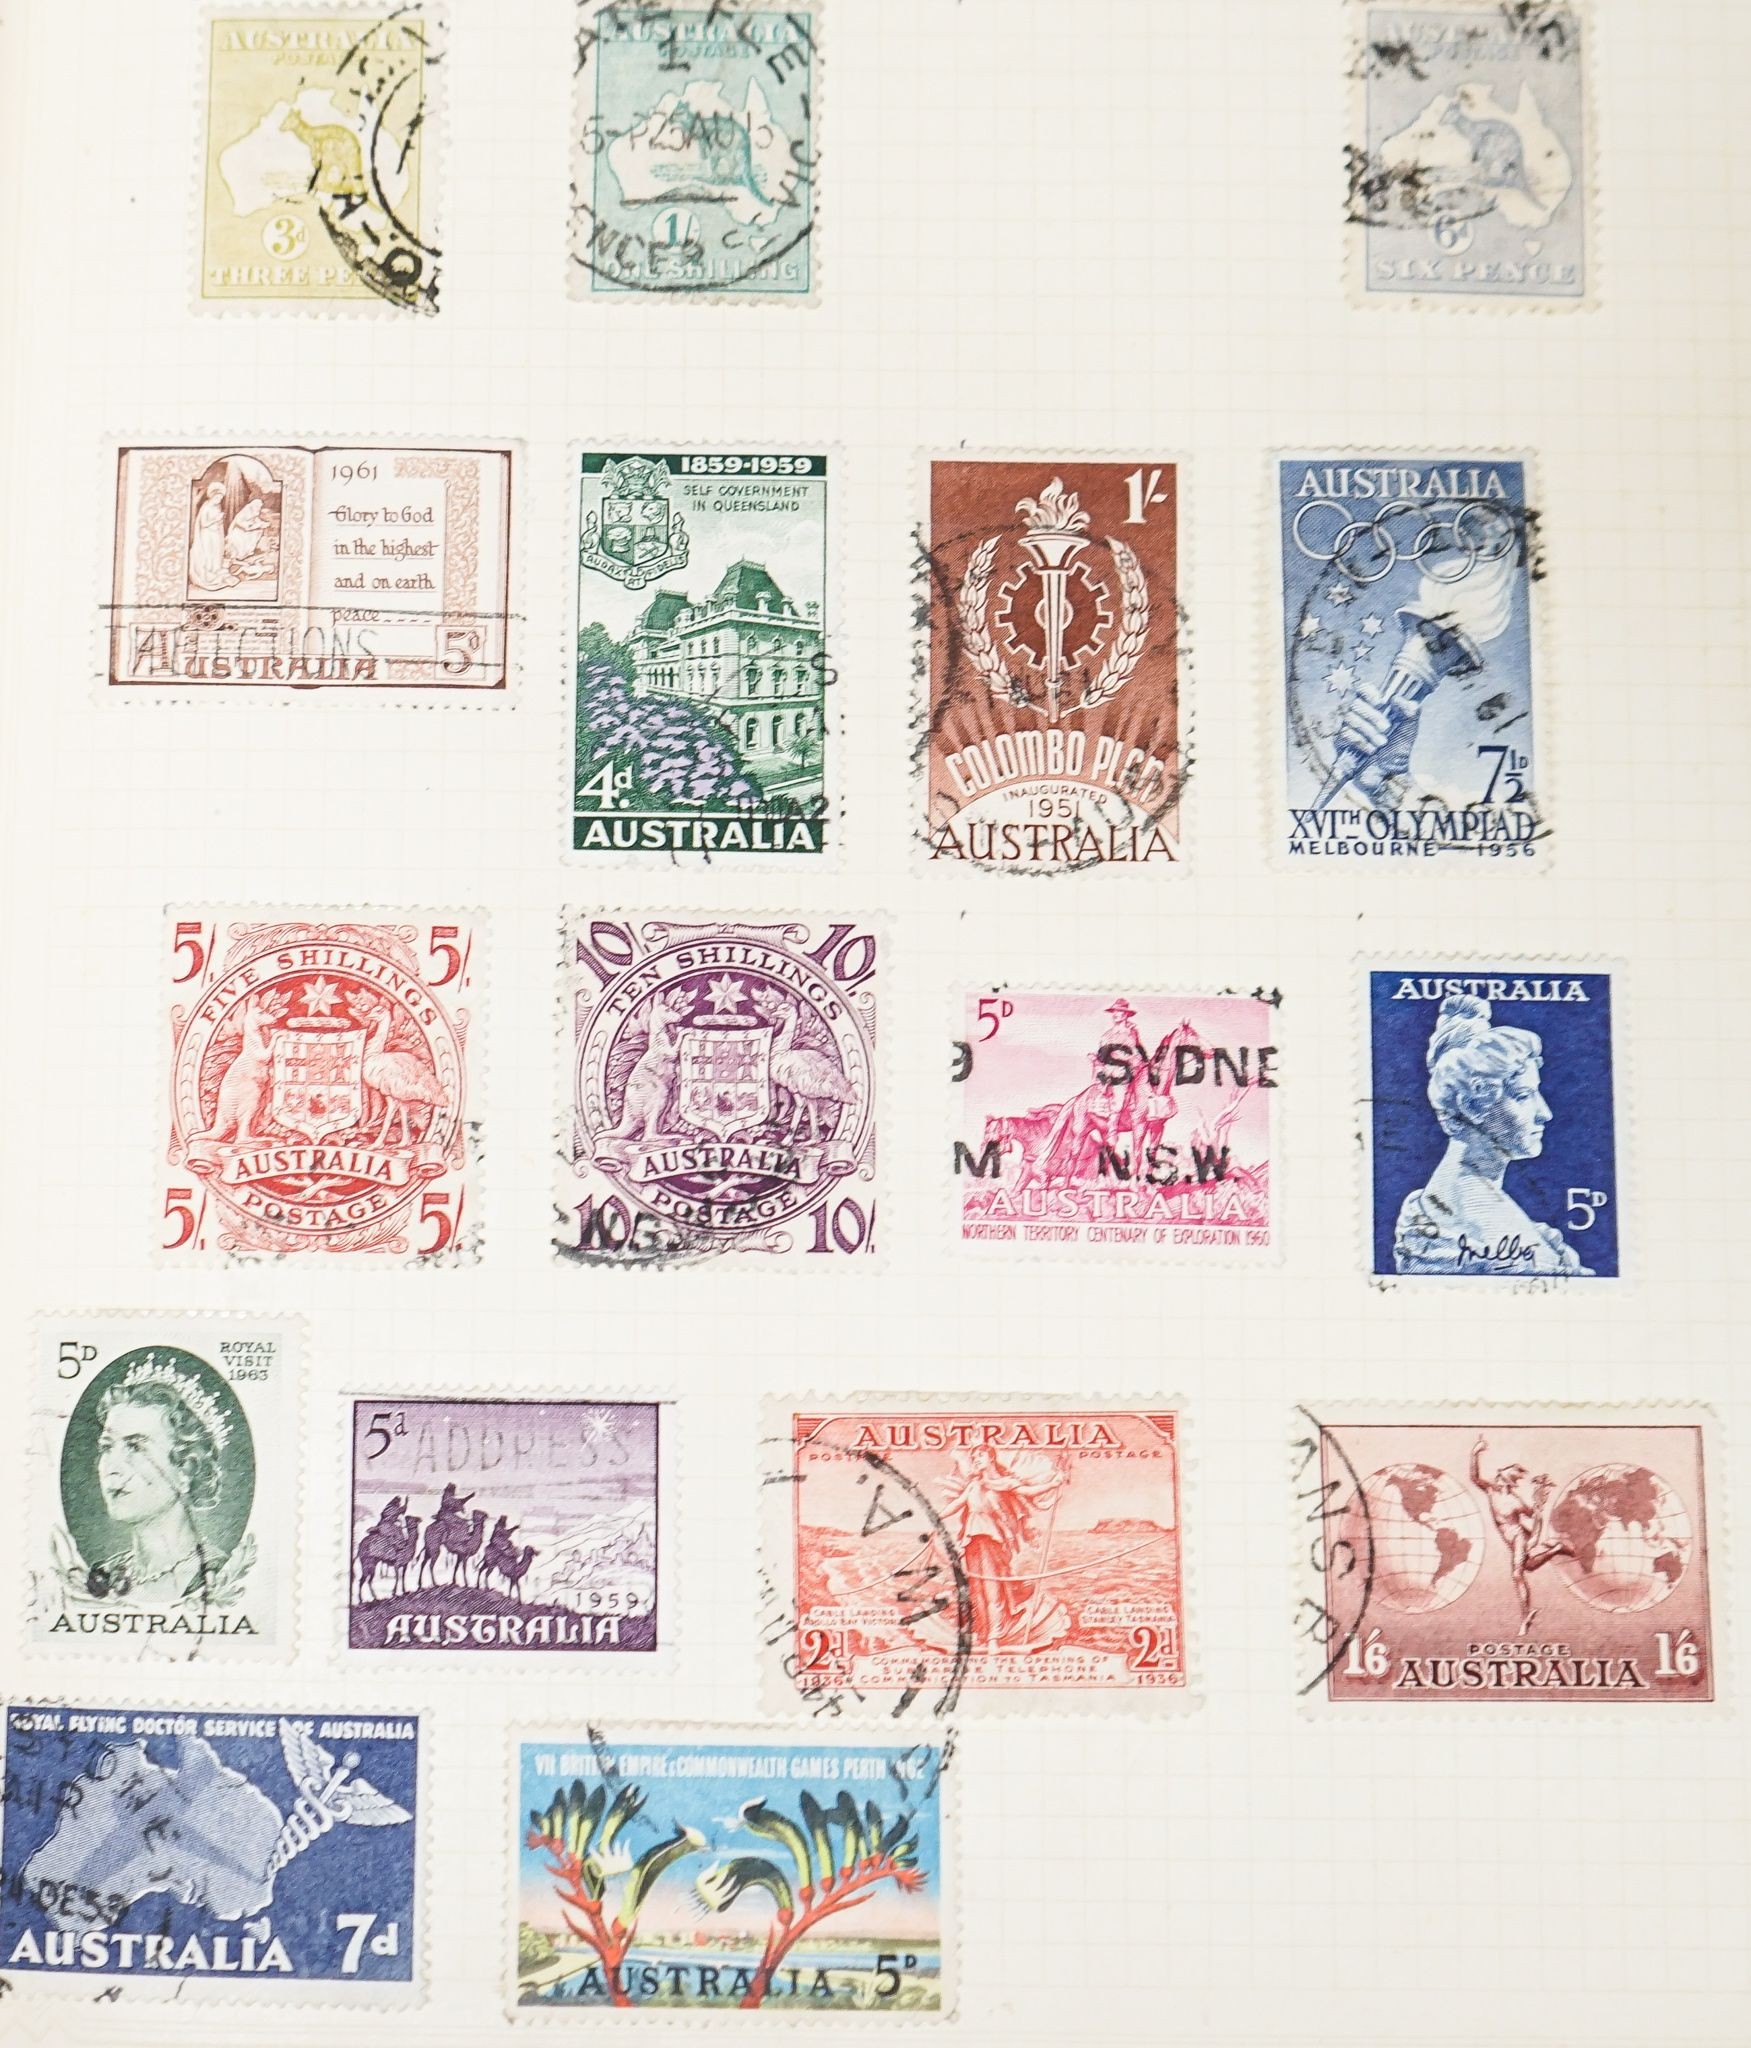 World stamps with Royal events, first day covers, Channel Islands, Australia and various